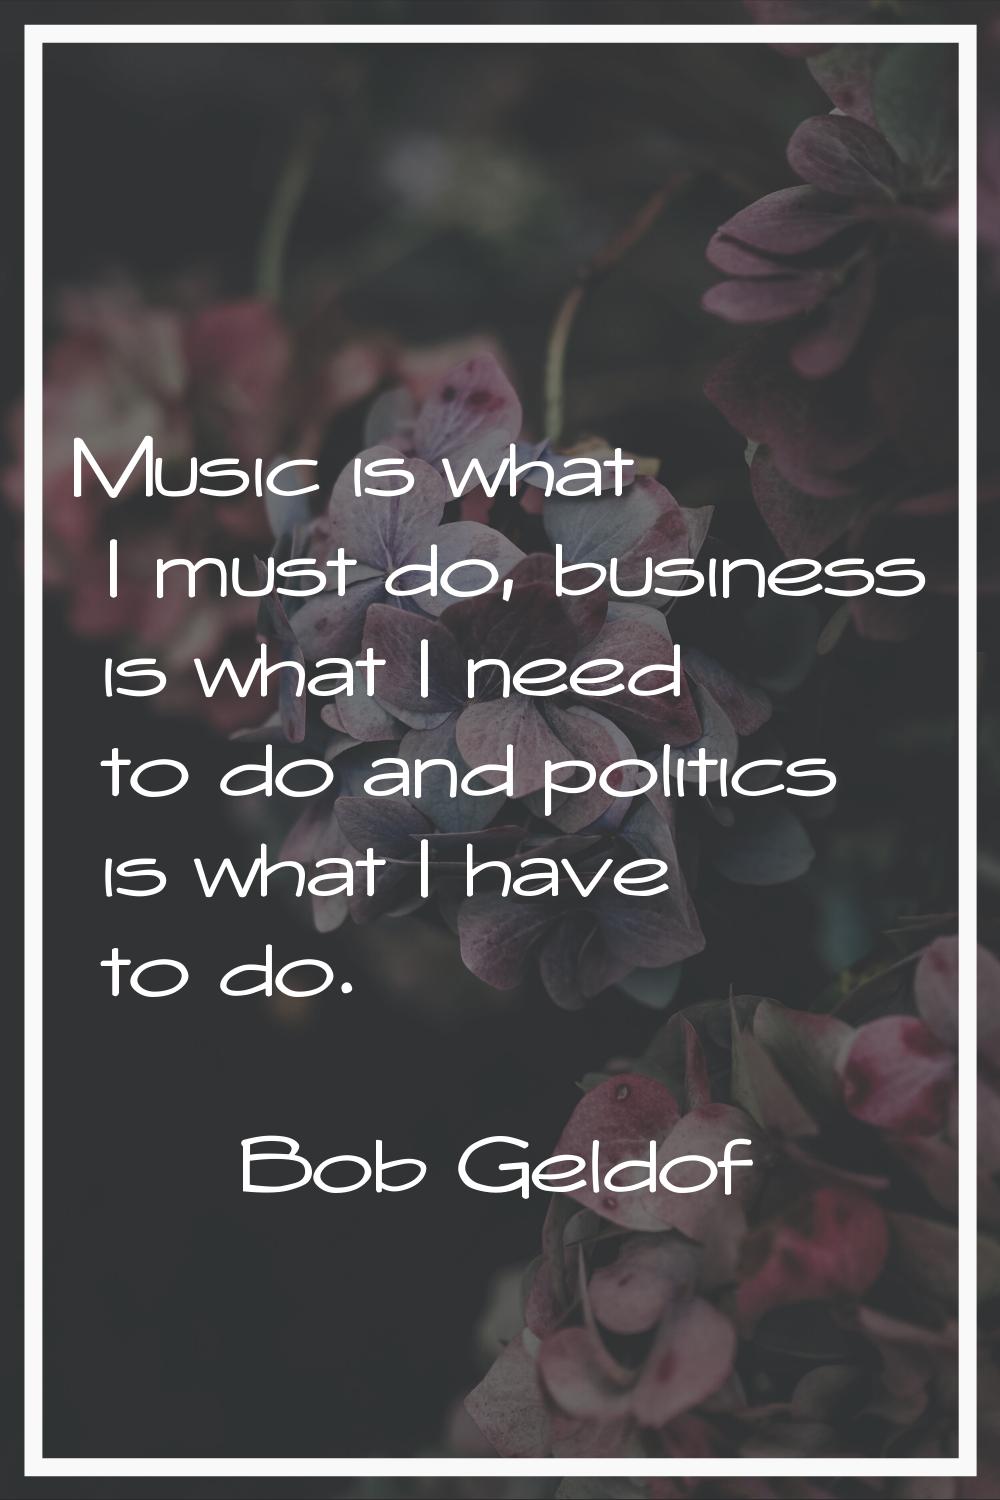 Music is what I must do, business is what I need to do and politics is what I have to do.